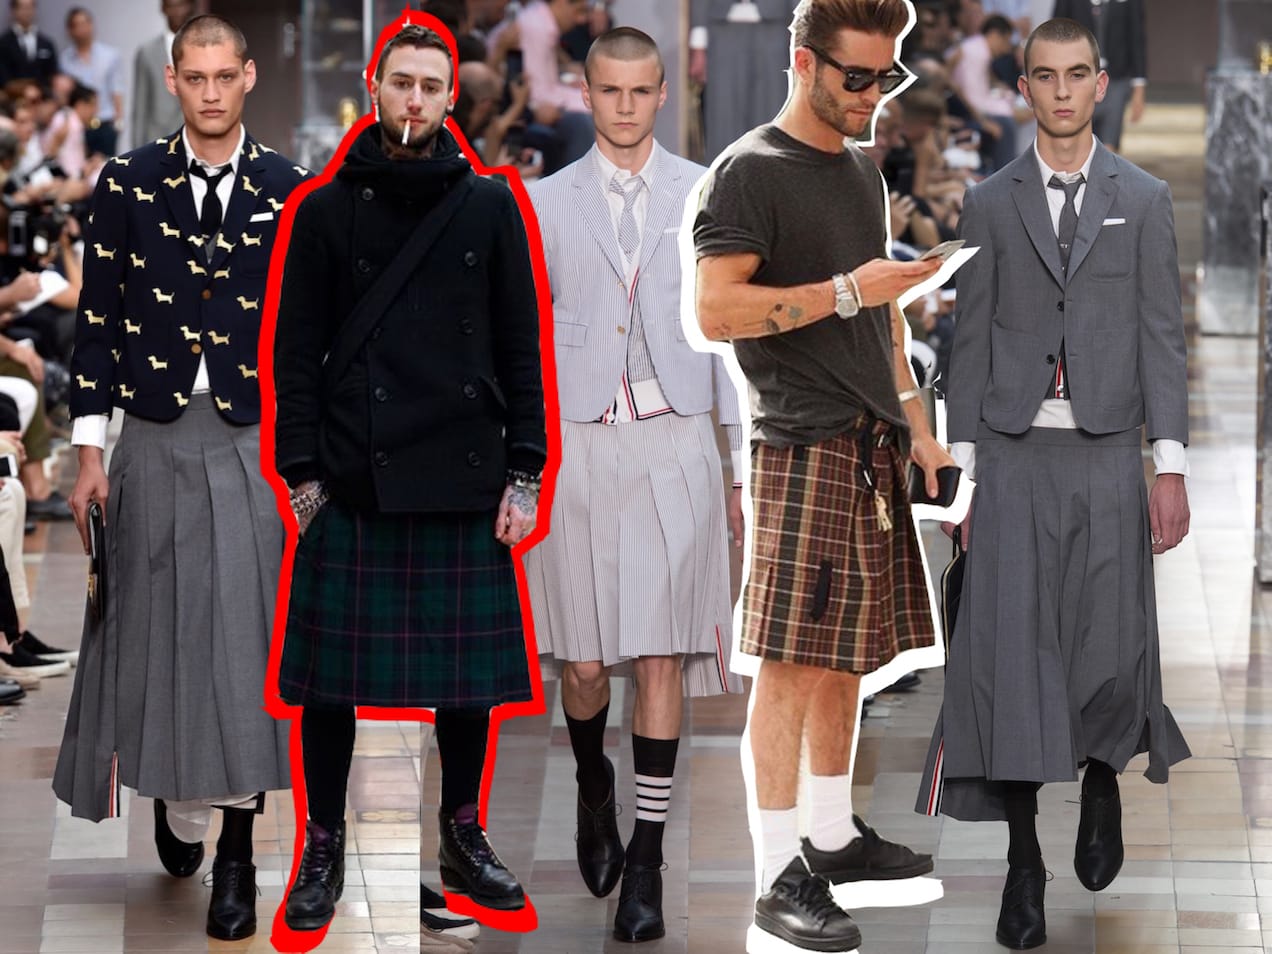 "Men in dresses" - Will it become a trend in 2019?